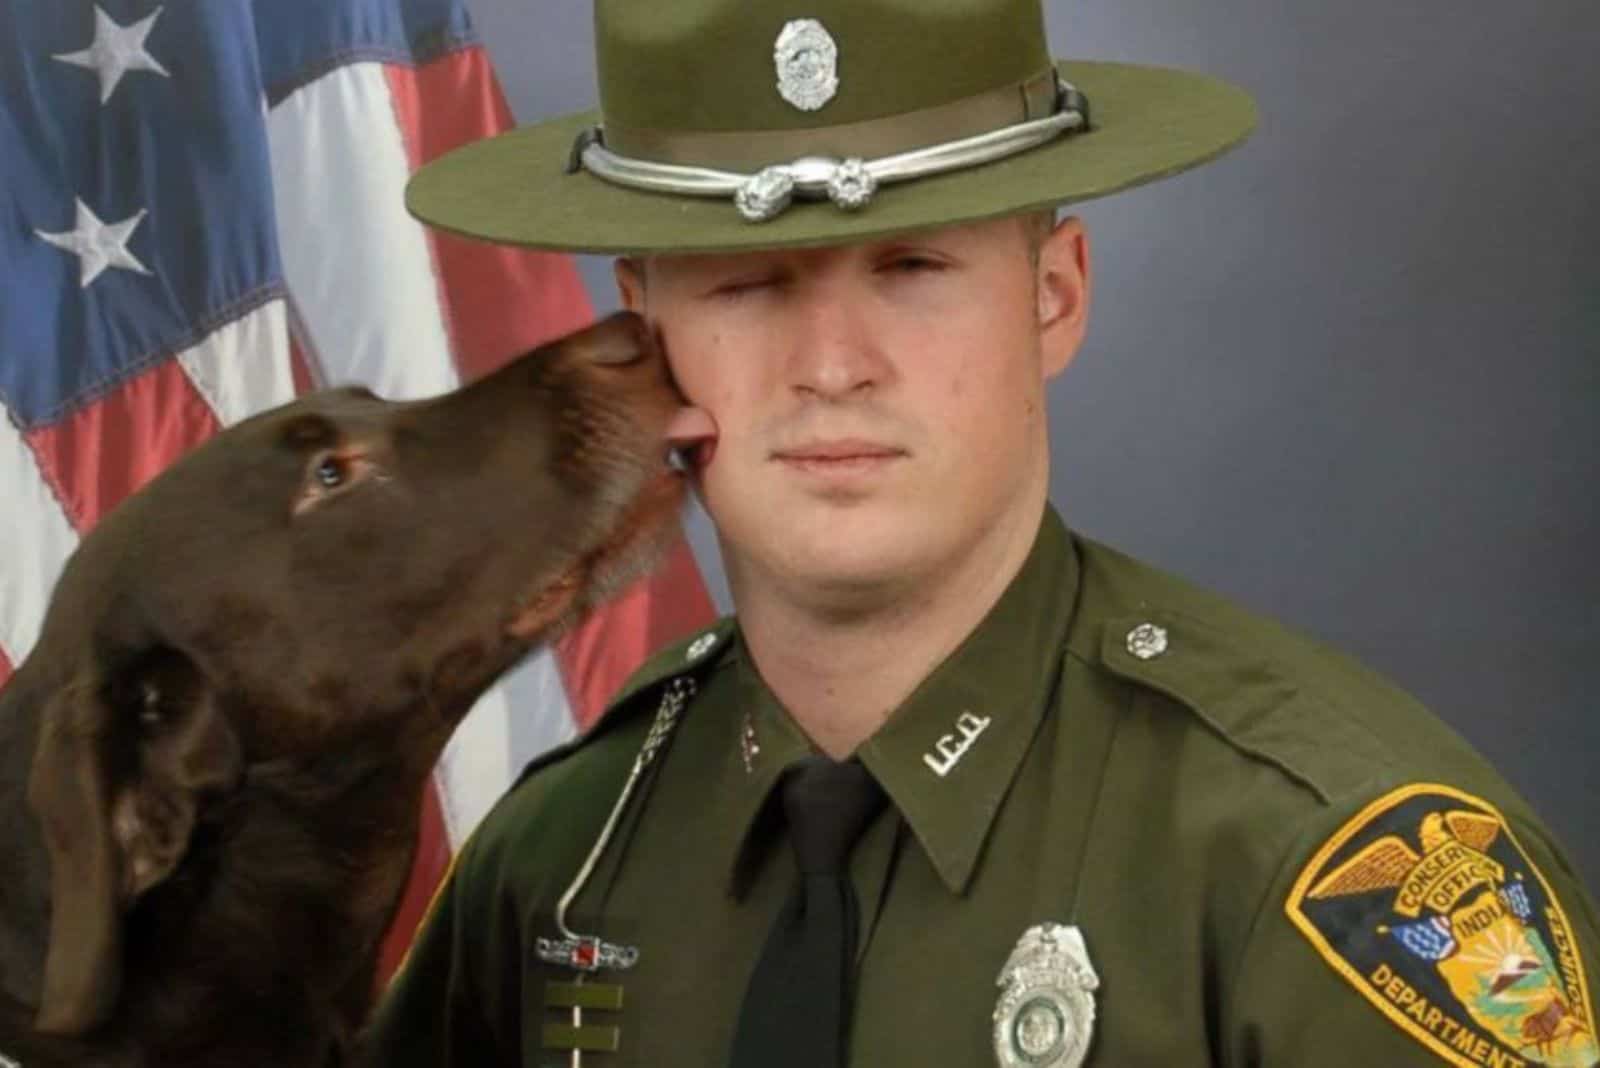 dog licking conservation officer during photoshoot